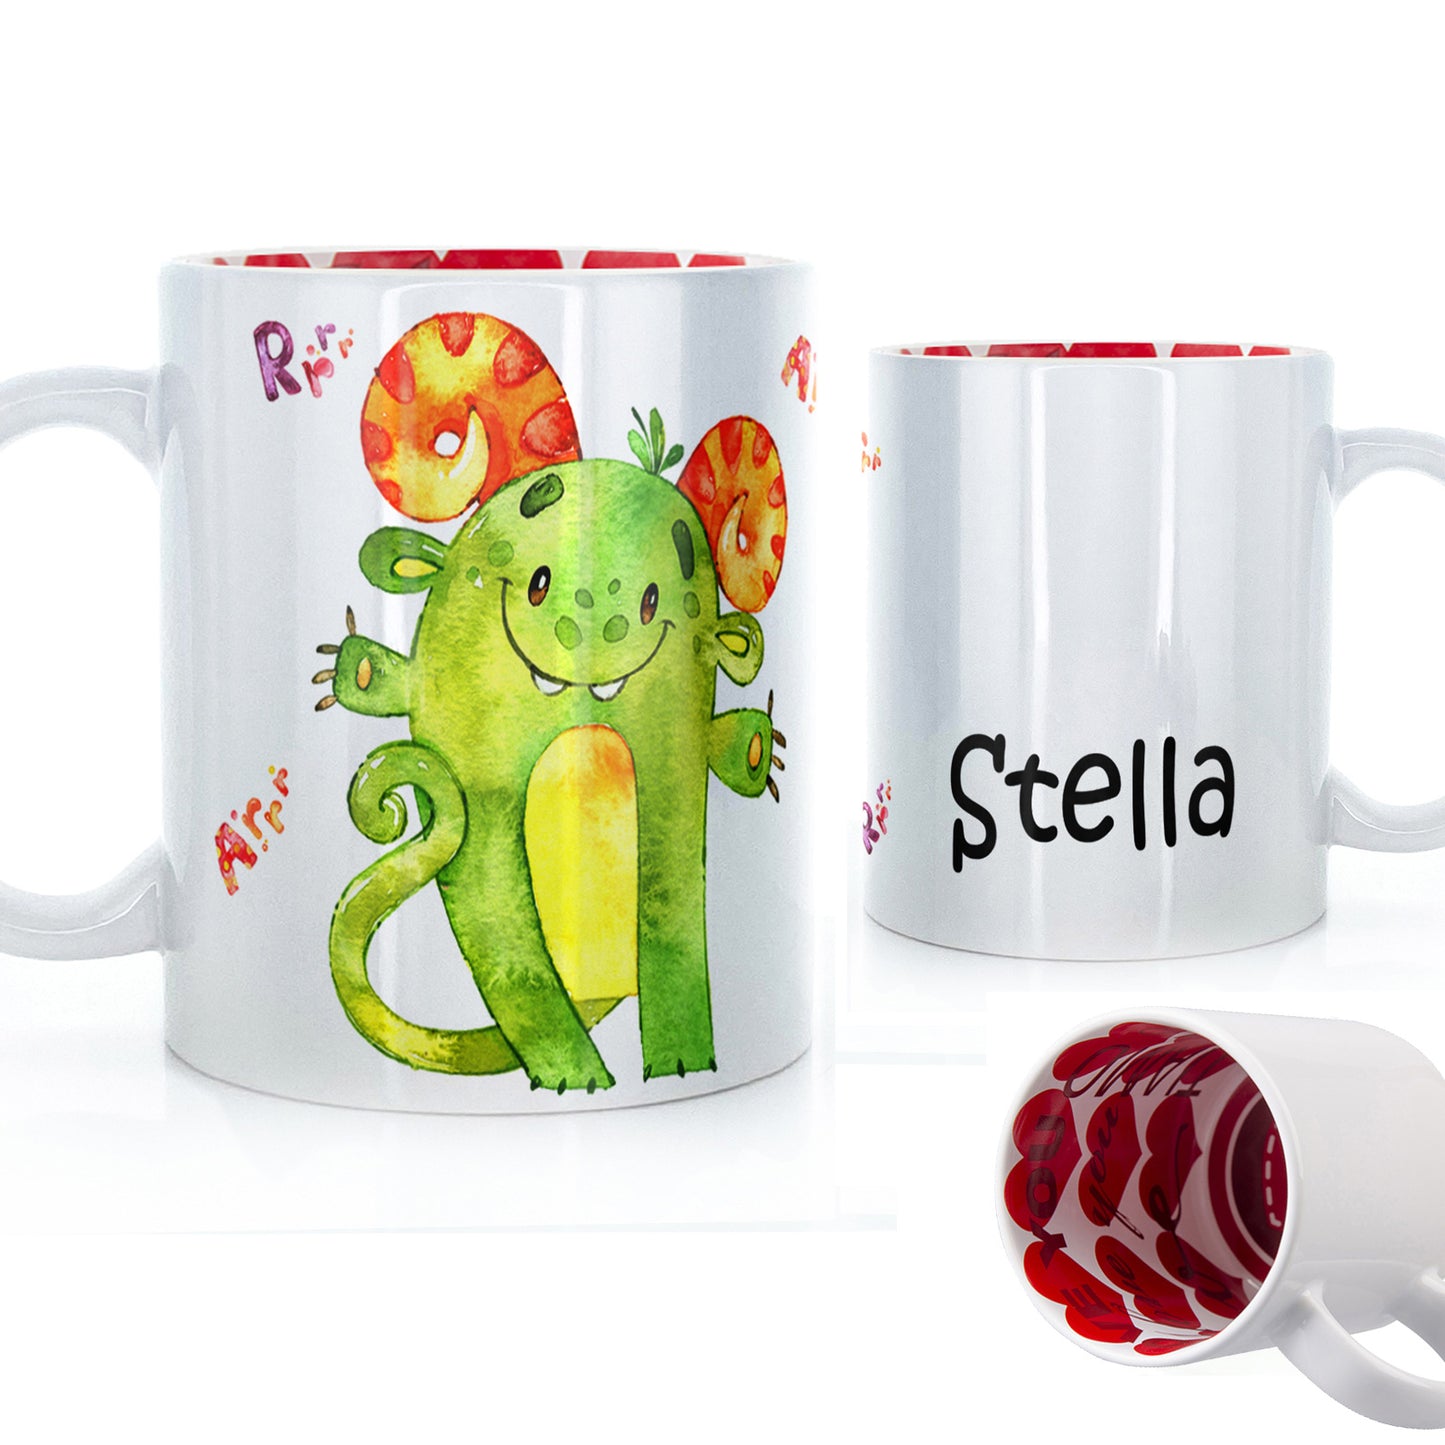 Personalised Mug with Childish Text and Horned Growling Green Monster